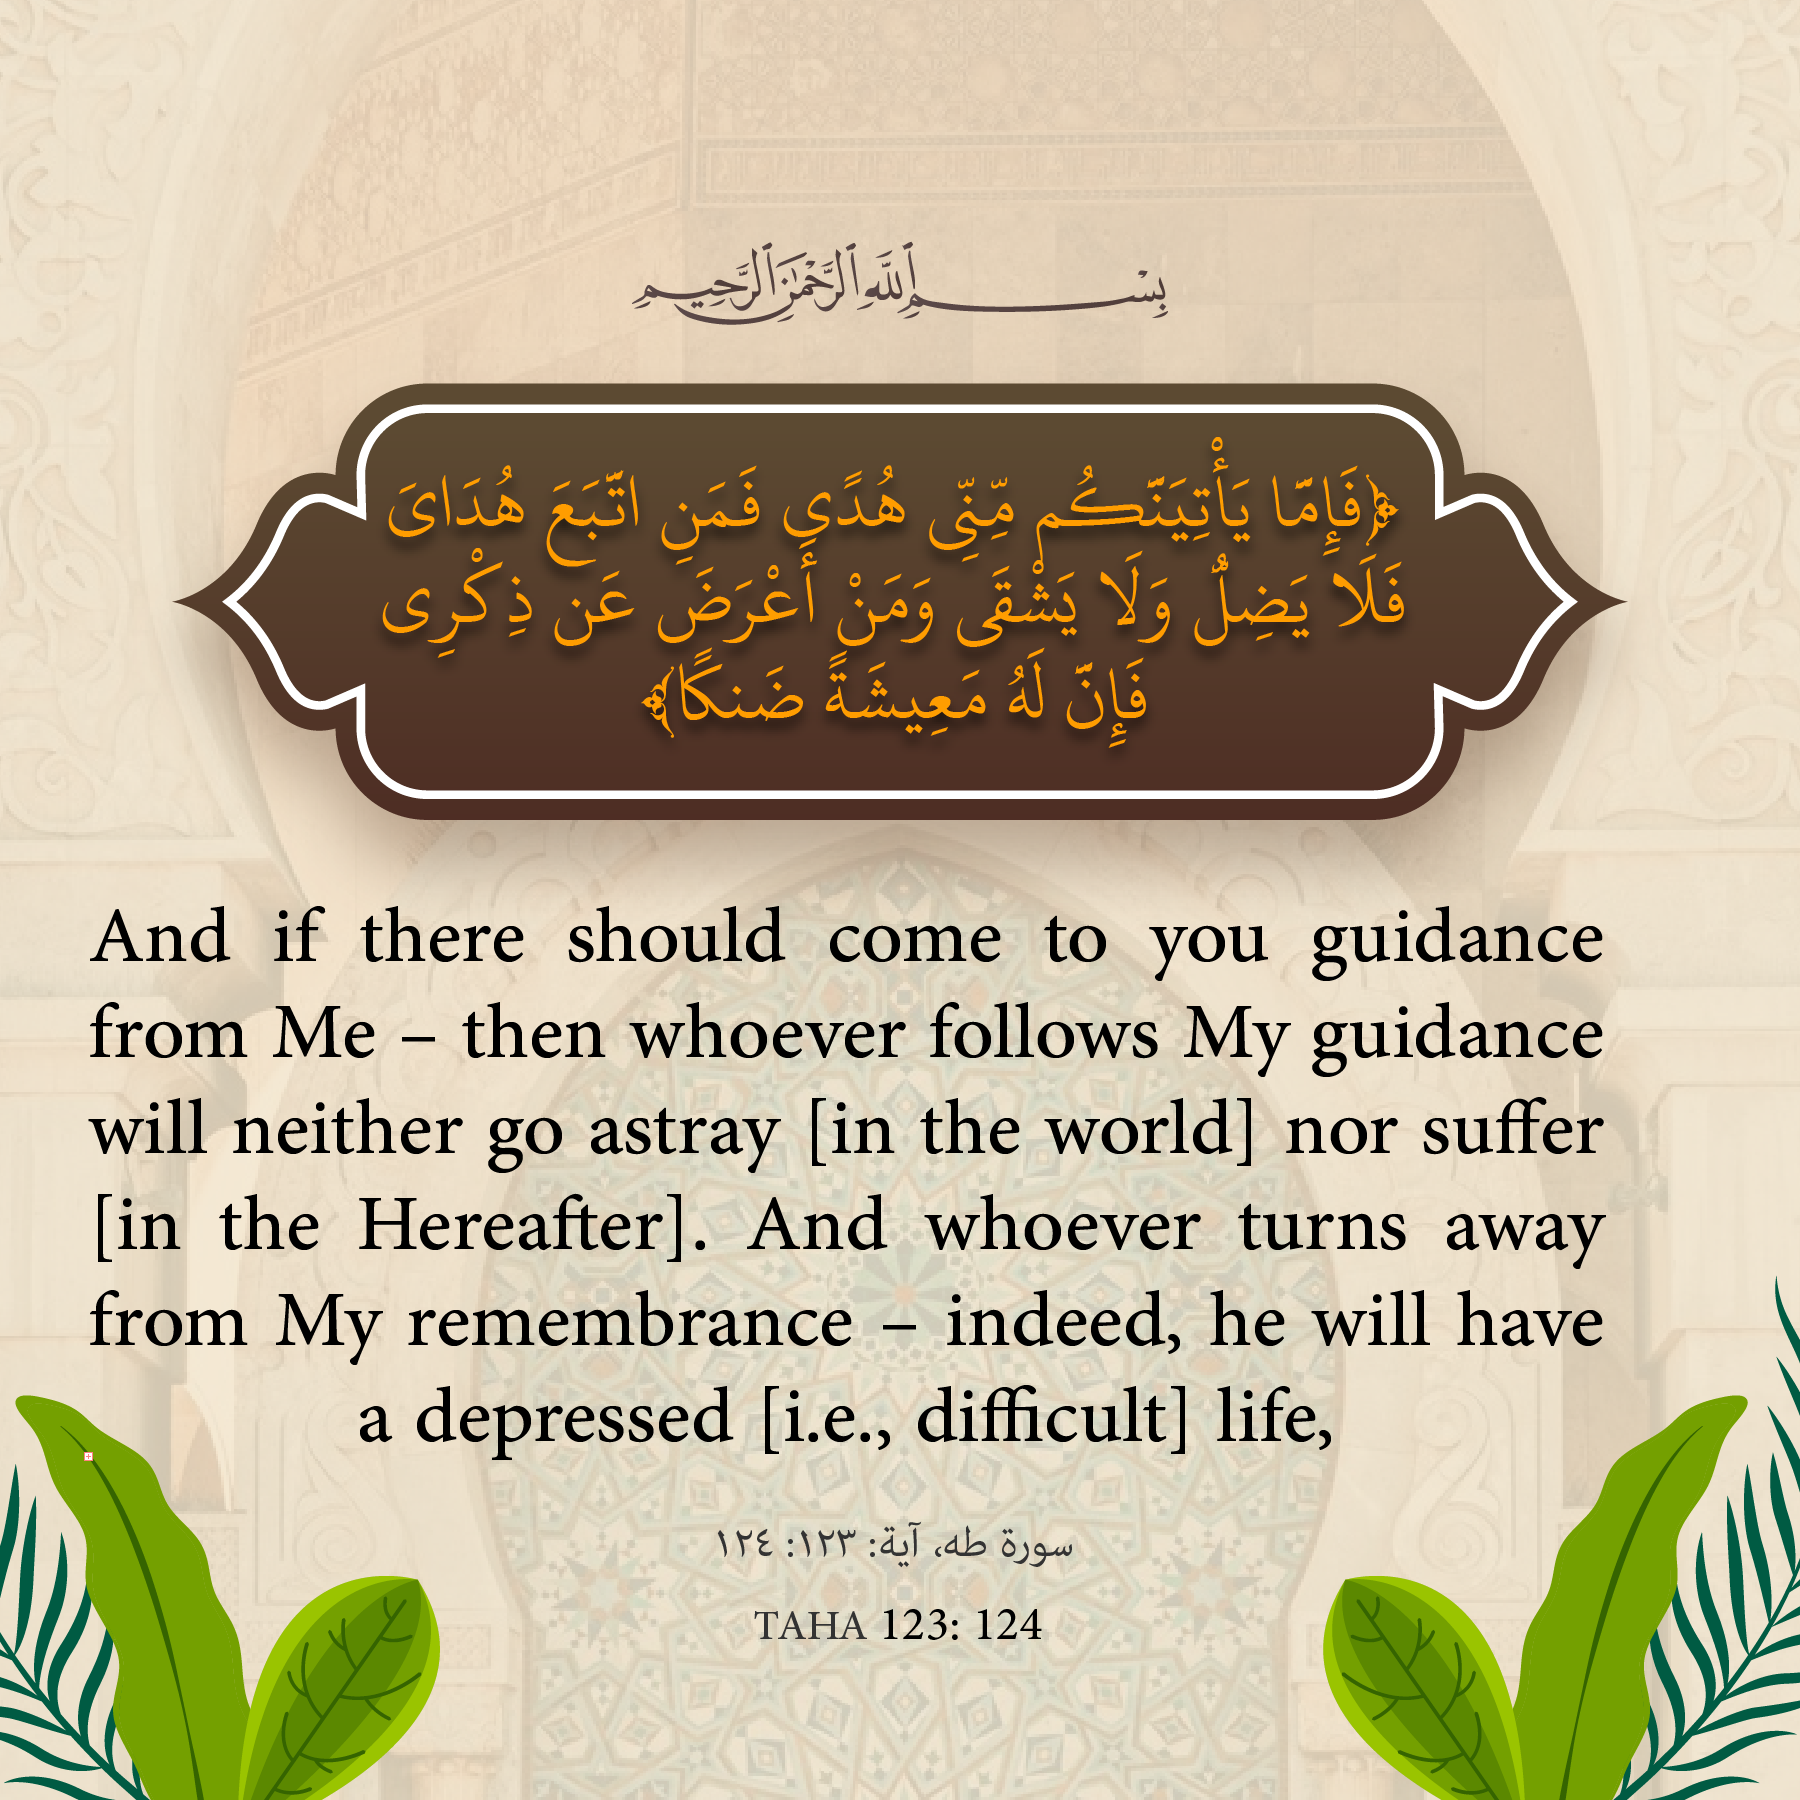 "And if there should come to you guidance from Me.."